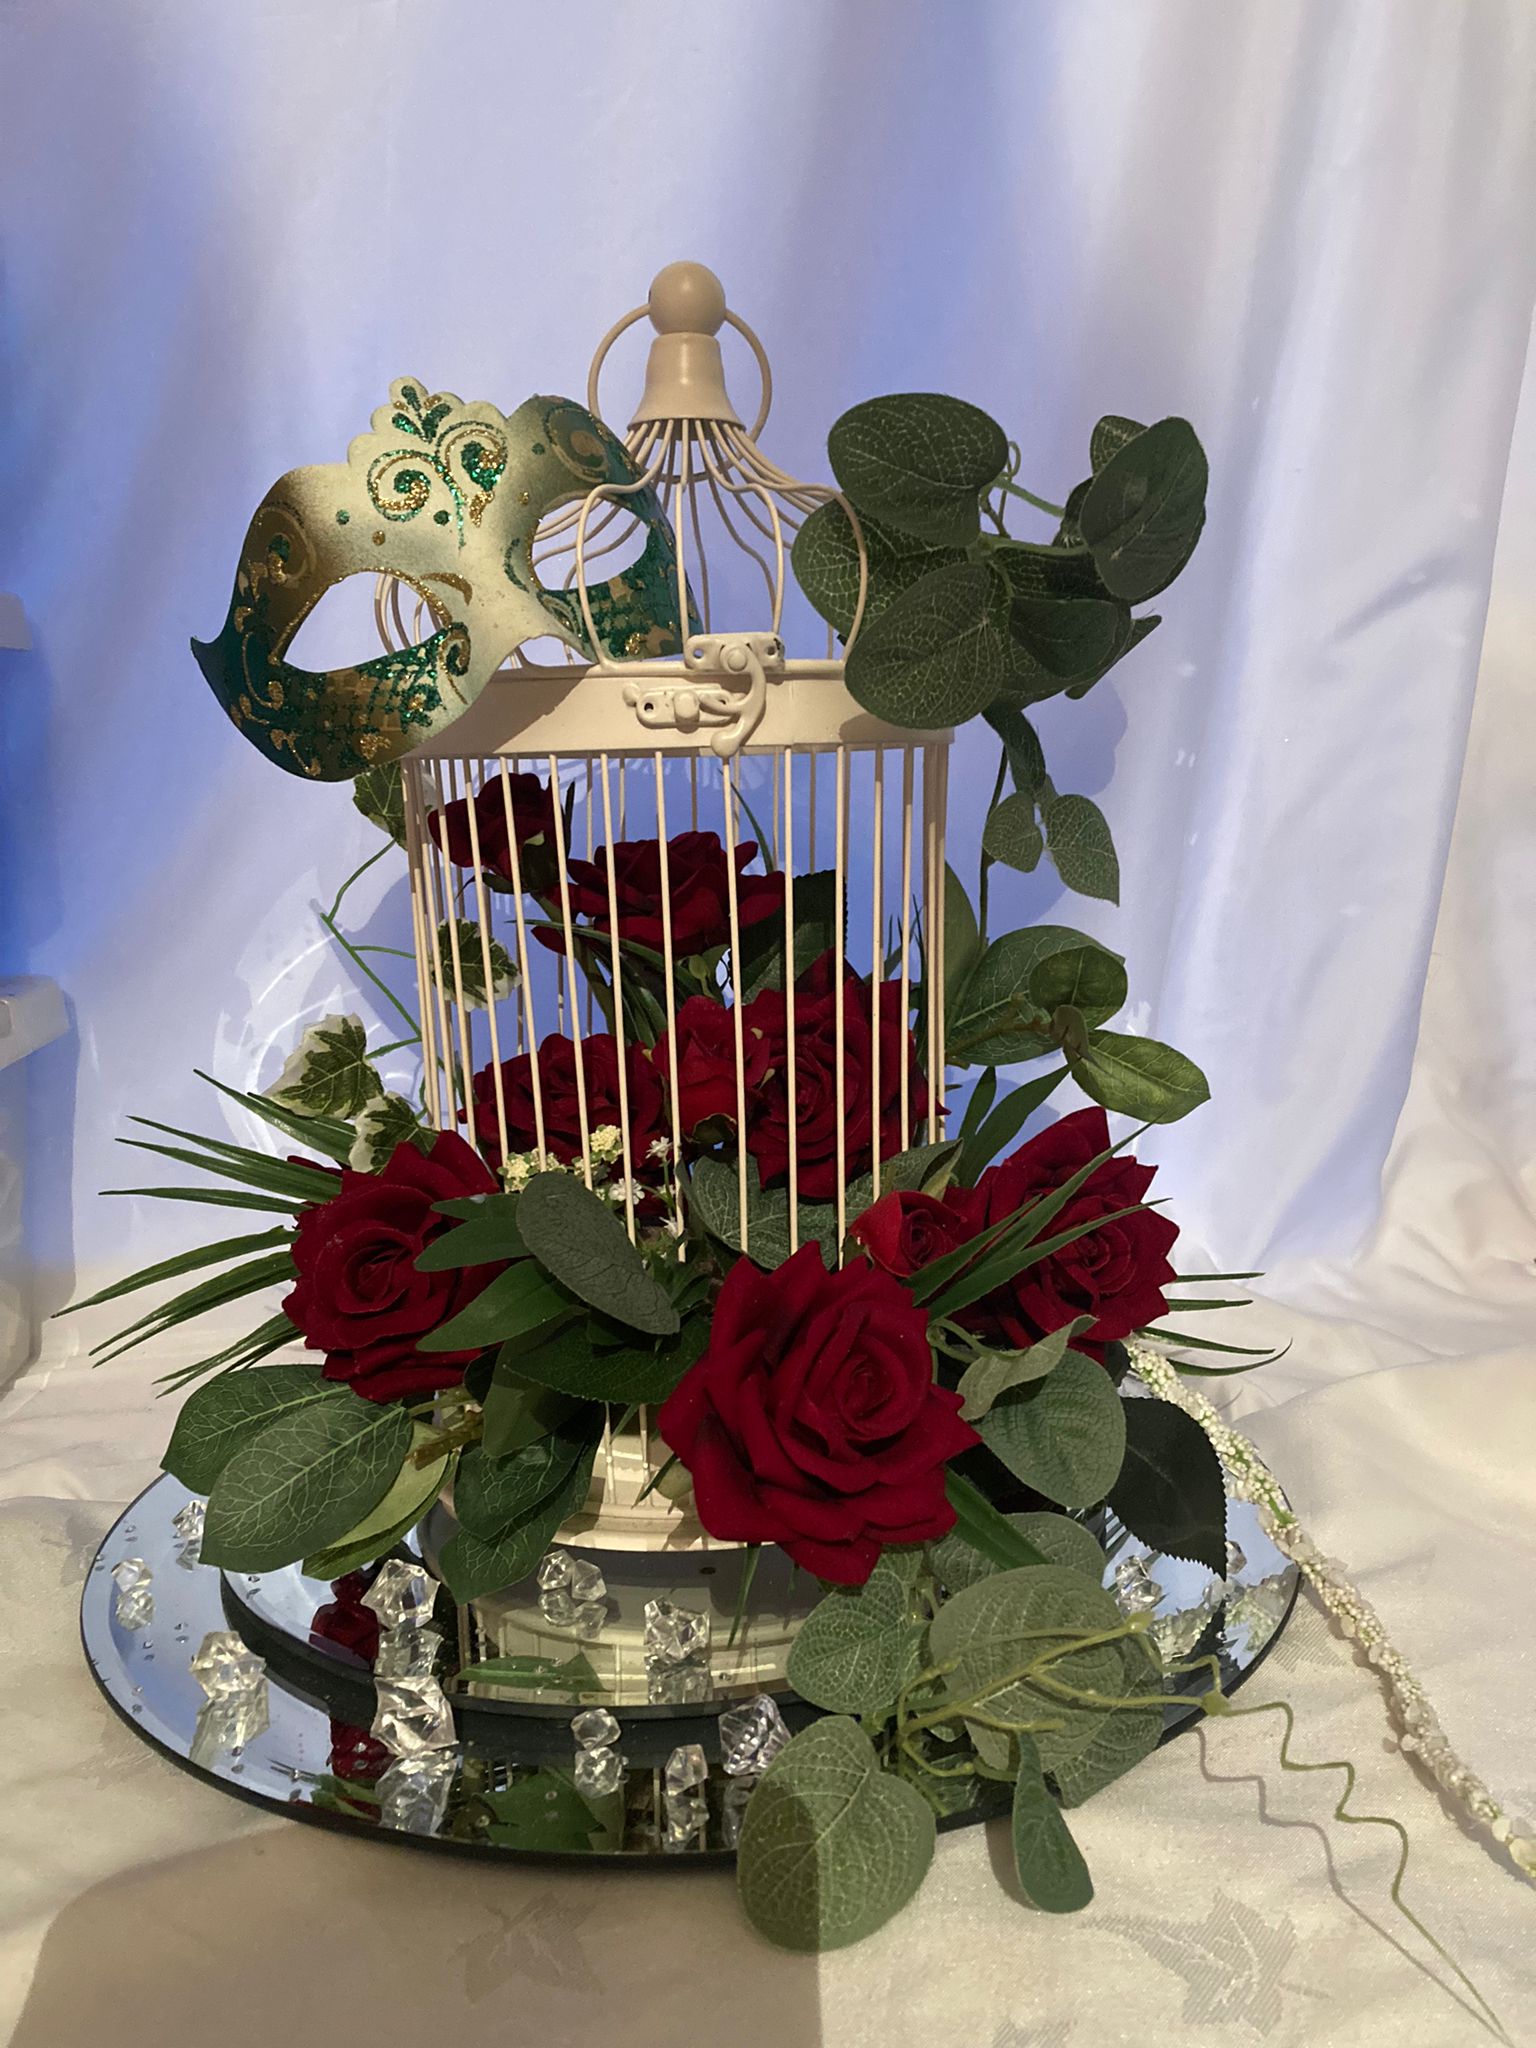 Bird cage centrepiece with mirror plate and red roses